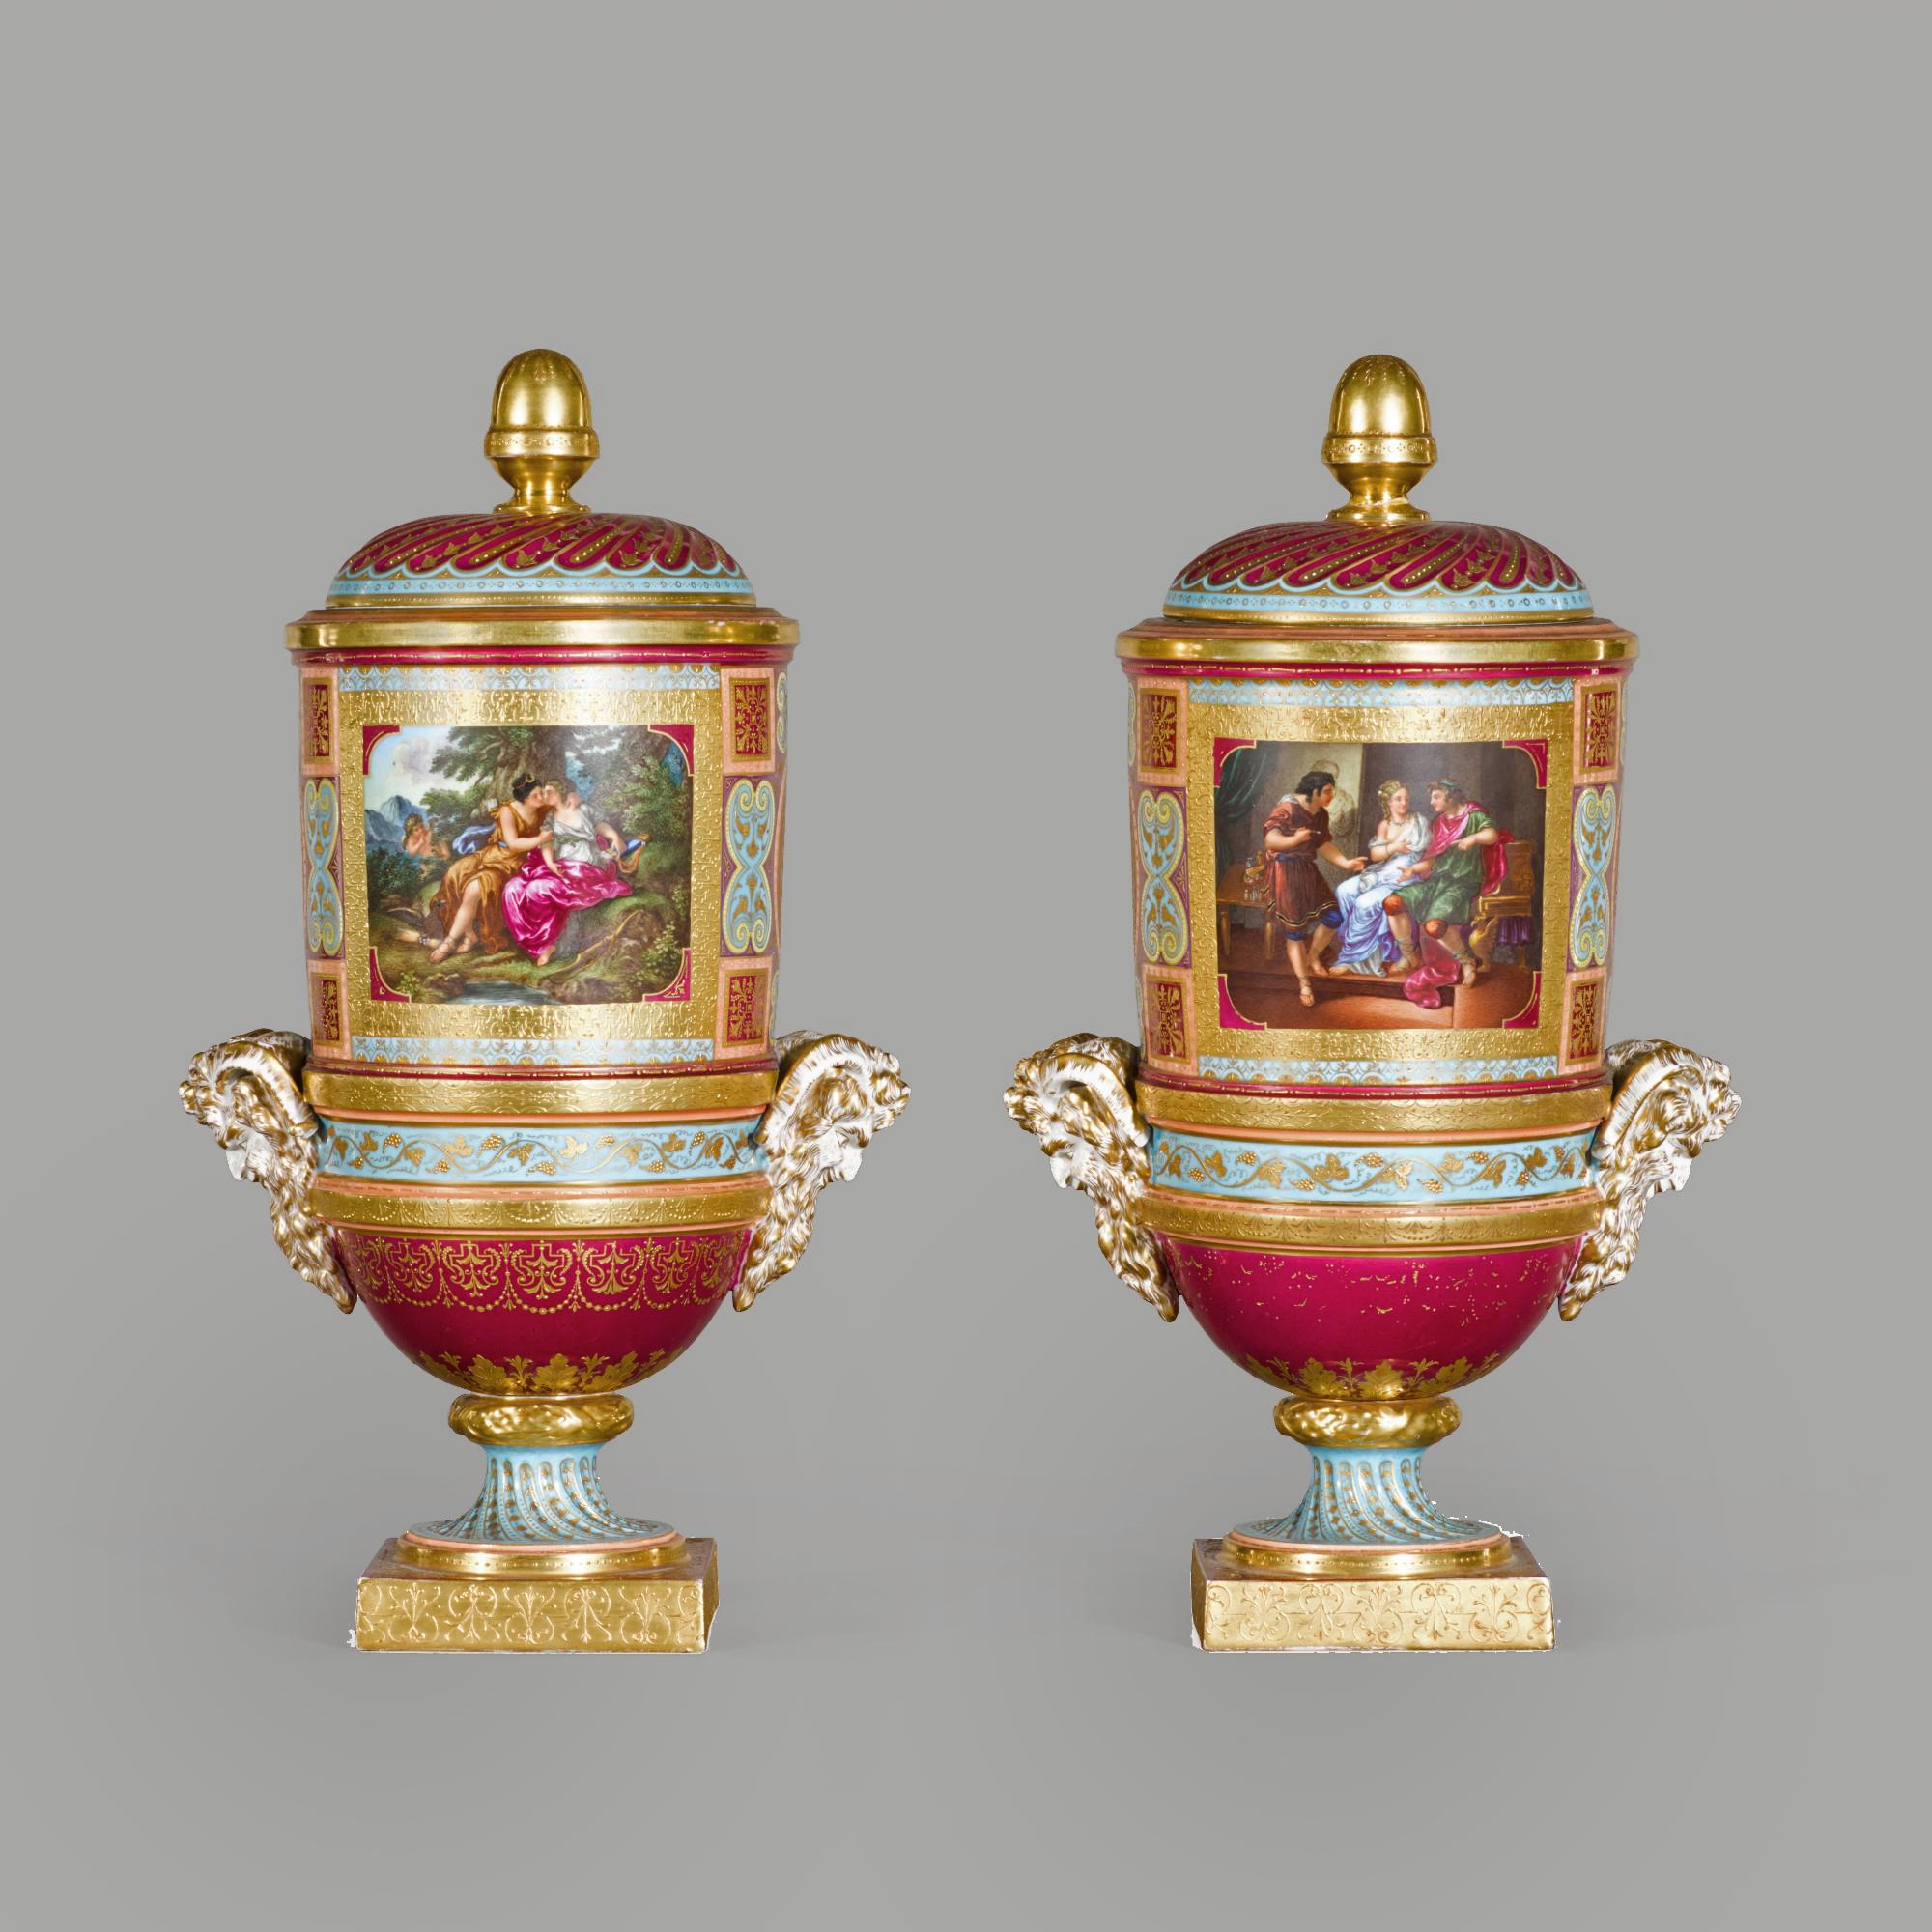 A fine pair of Vienna style covered cylindrical vases, on square footed socle bases.

The vases are decorated with classical scenes including Jupiter and Callisto, after Angelica Kauffman and Bacchus and Ariadne. The vases have satyr head handles